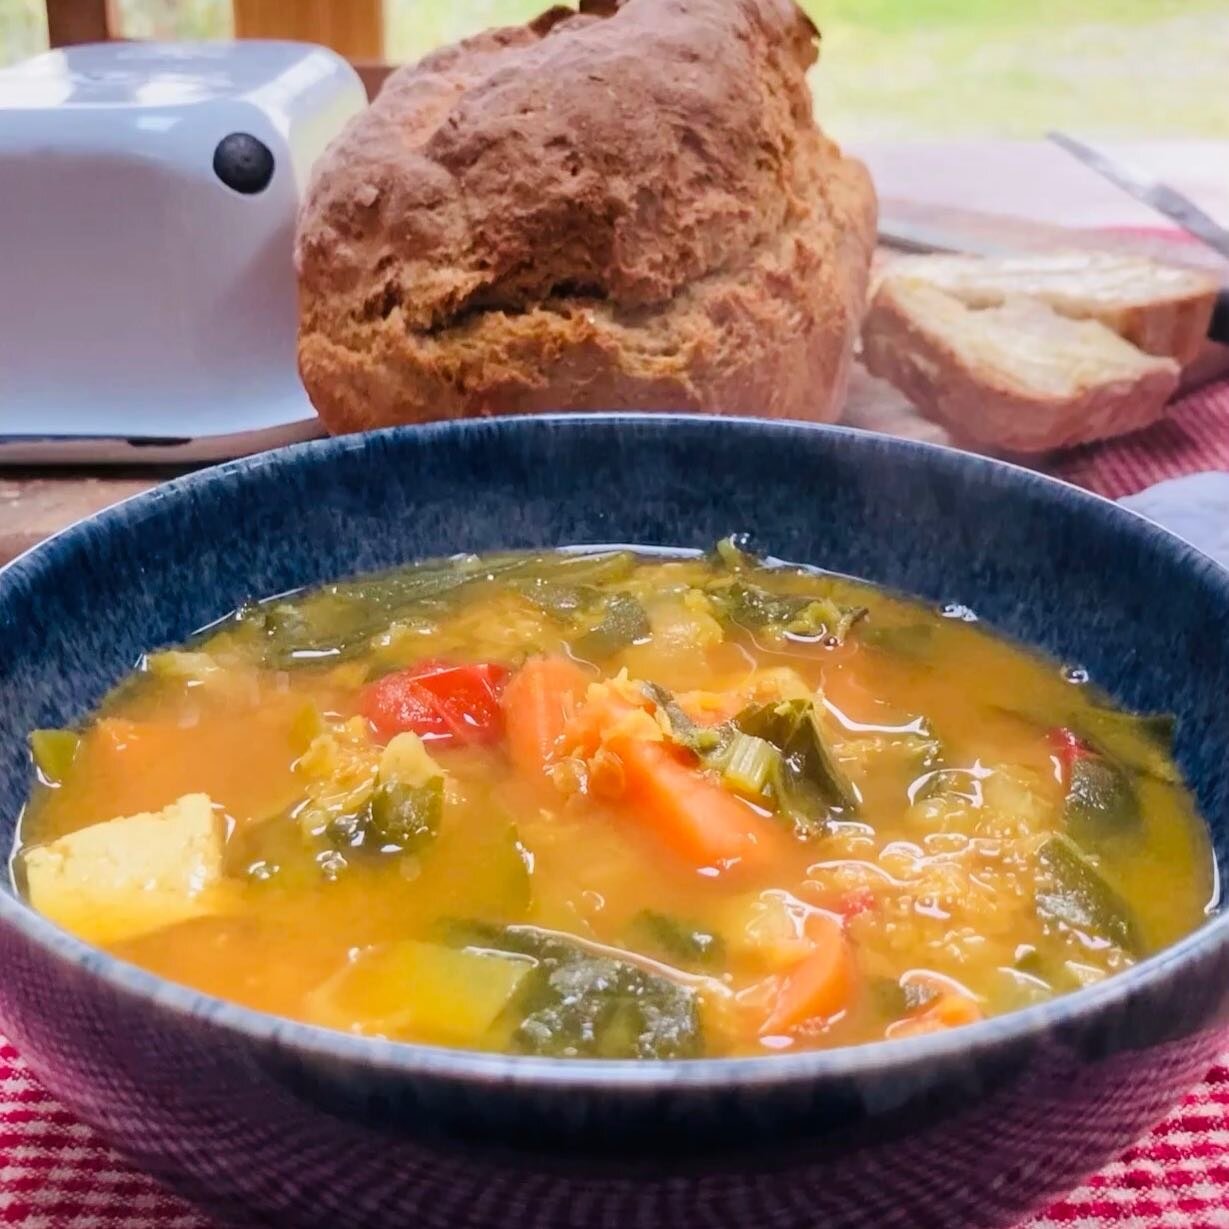 The winter is here &amp; I felt like a spicy Dahl &amp; some fresh bread 😇 I will be making videos of the food I make for people on retreat @thewillowretreat &amp; posting over the next few months along with some useful postures for stretching &amp;